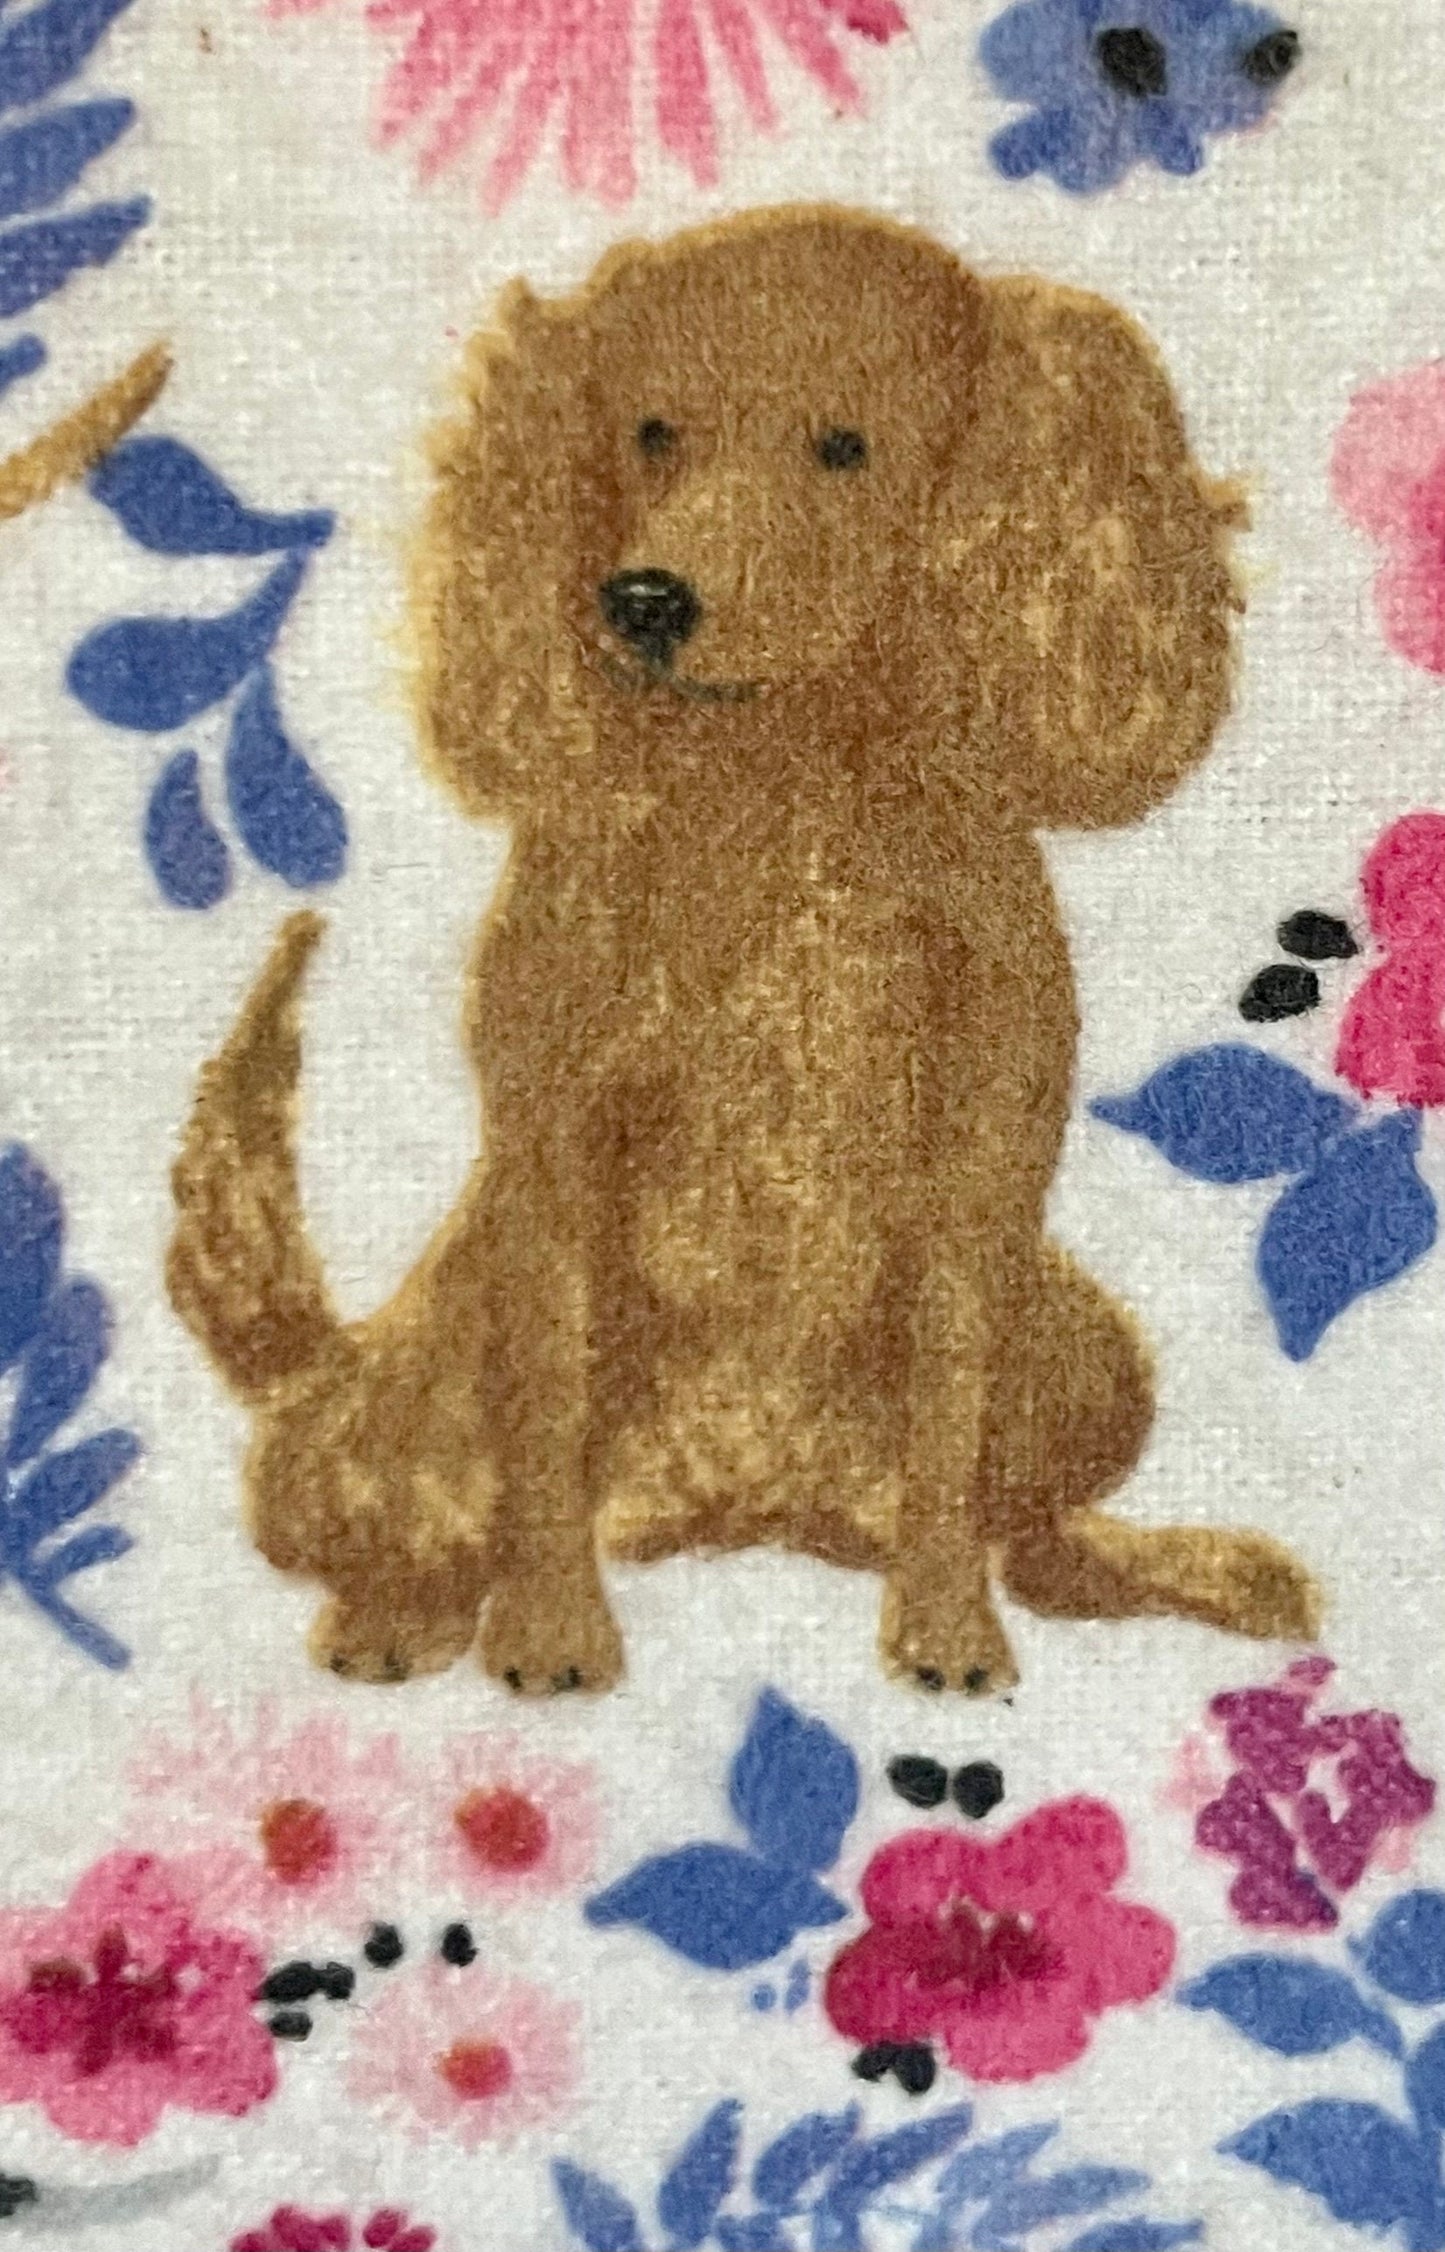 Every favorite dog and beautiful flowers dog lover dream blanket!